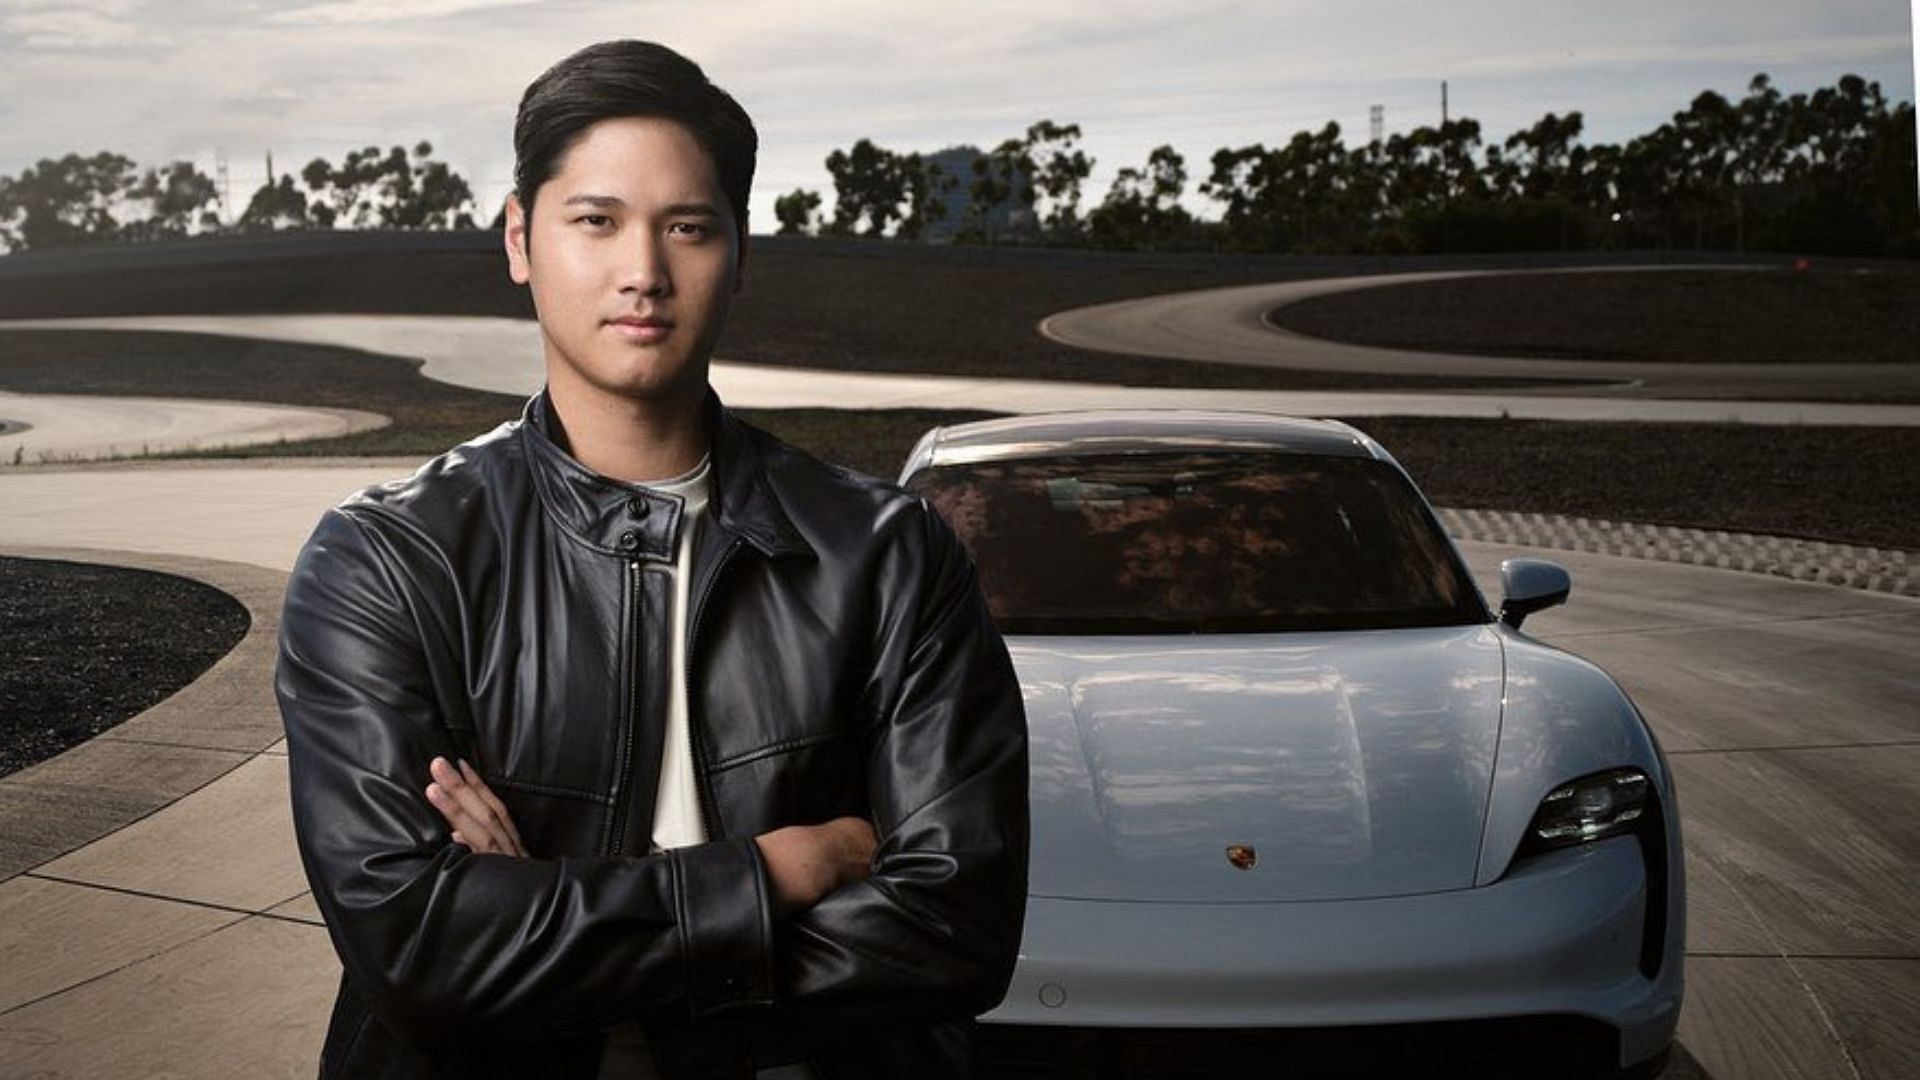 Ohtani during a photo shoot with Porsche recently [Credits: @shodoingthings/Twitter]